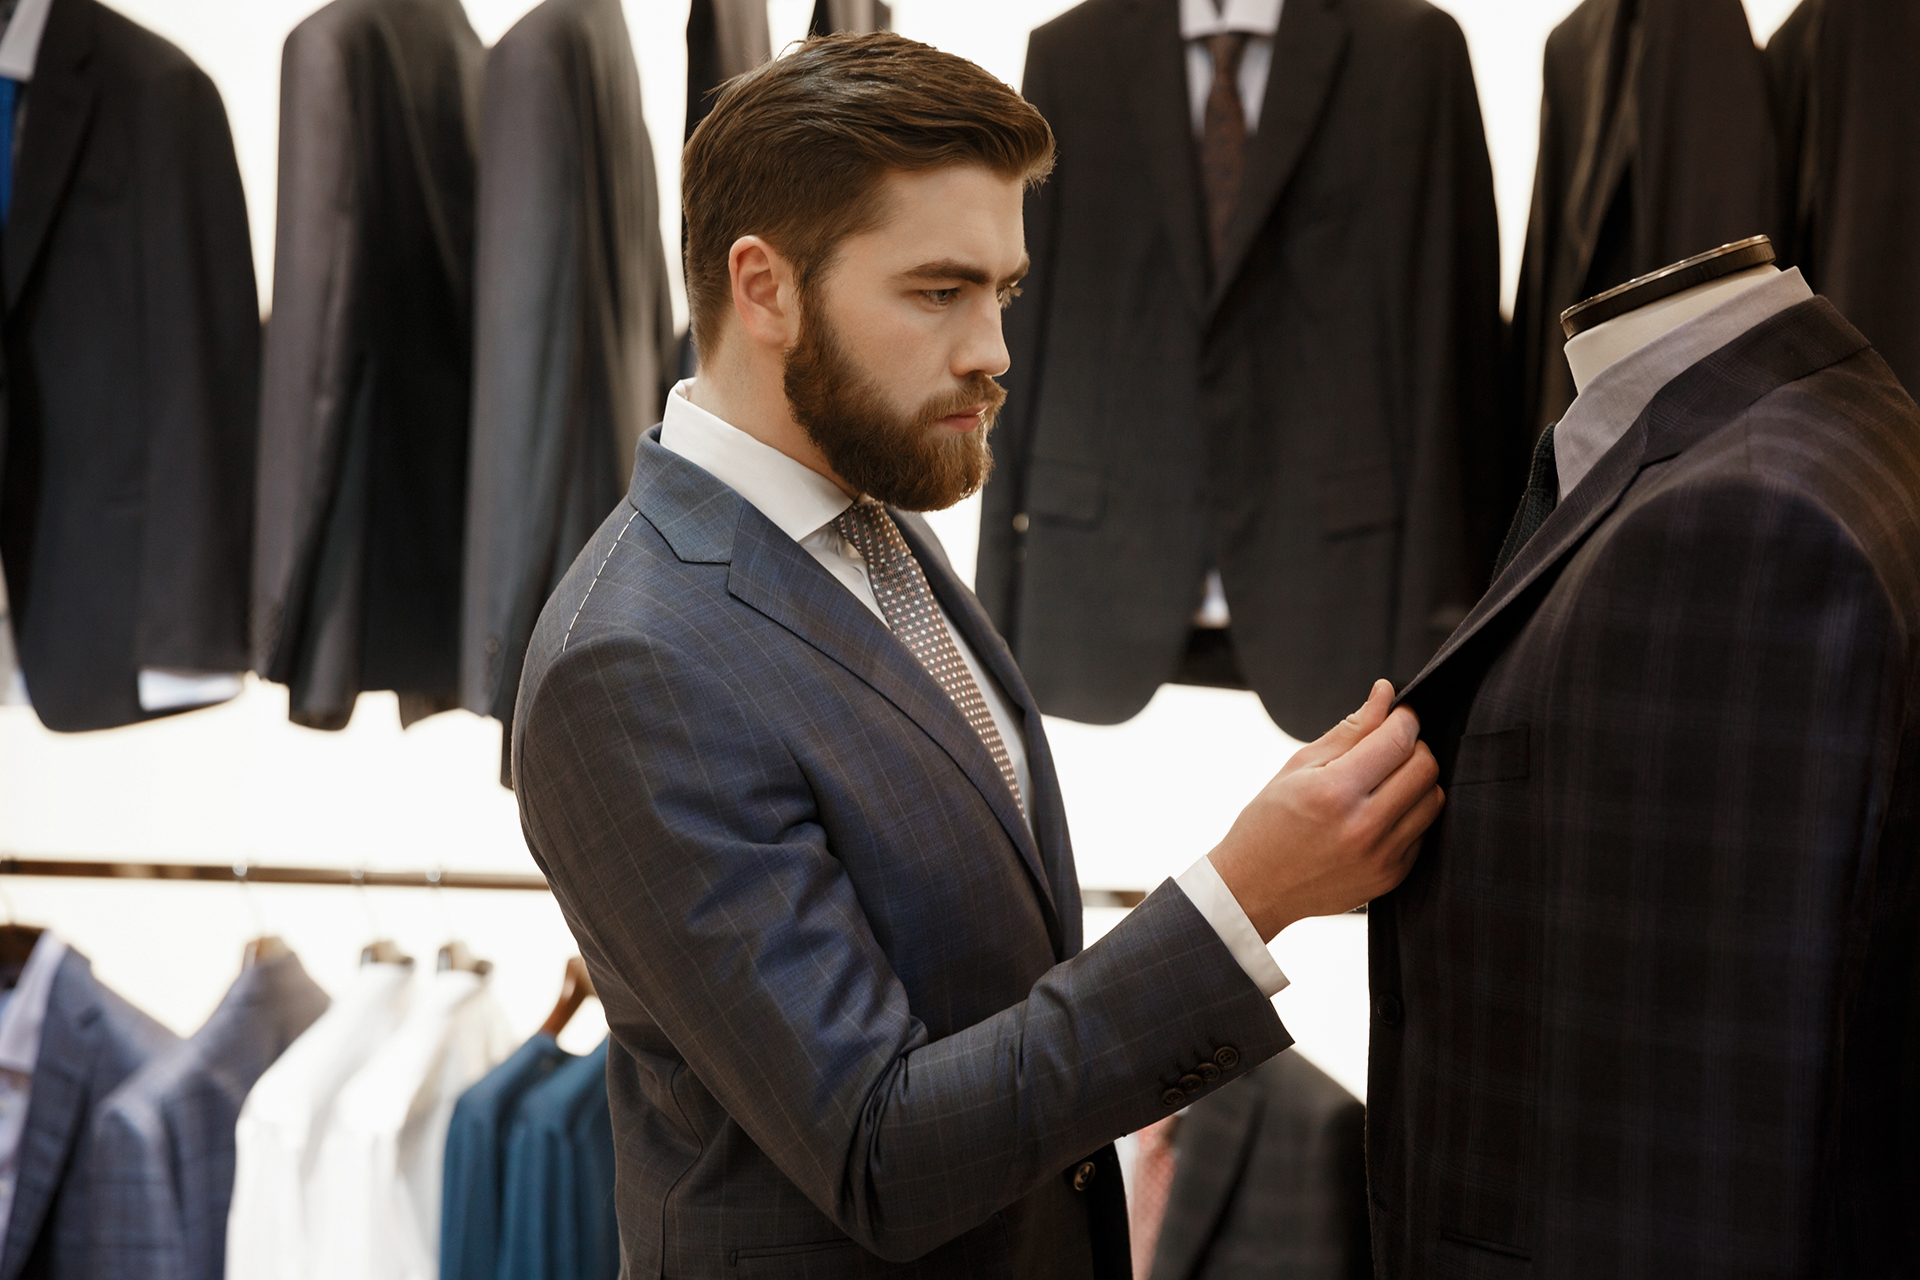 How Much Does a Good-Quality Suit Cost - Suits Expert